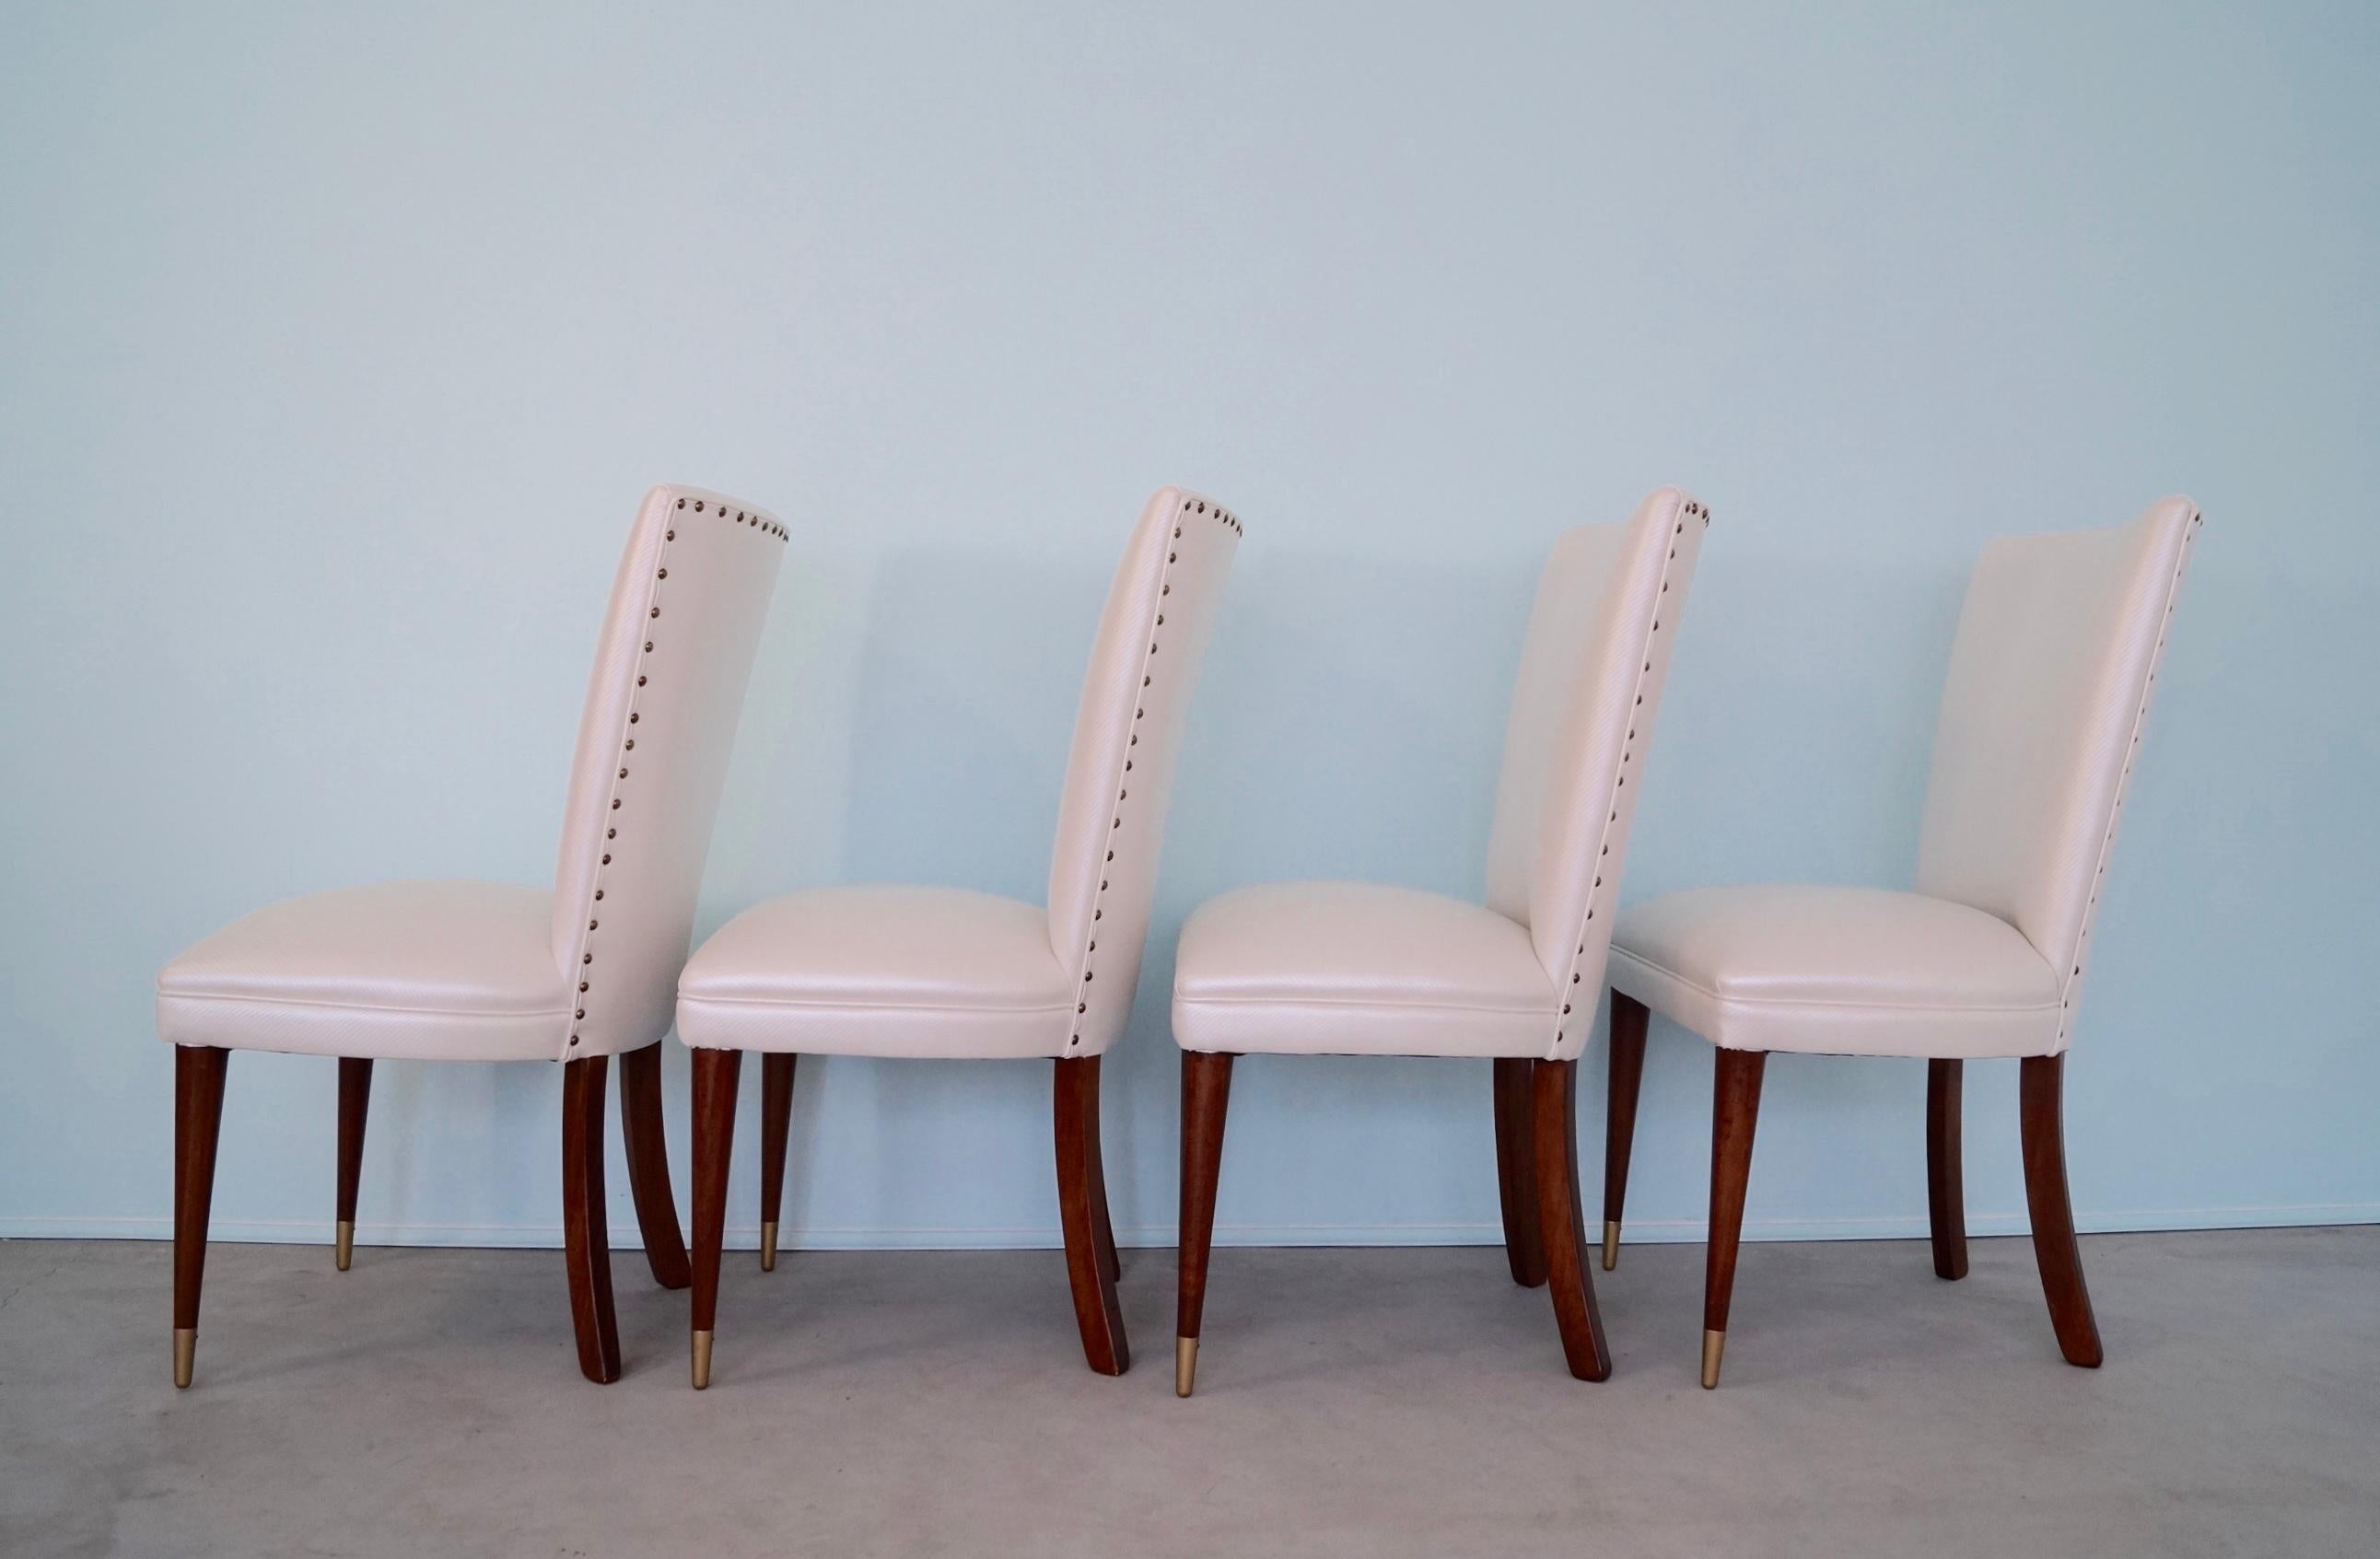 Wood 1950's Mid-Century Modern Hollywood Regency Dining Chairs - Set of 4 For Sale